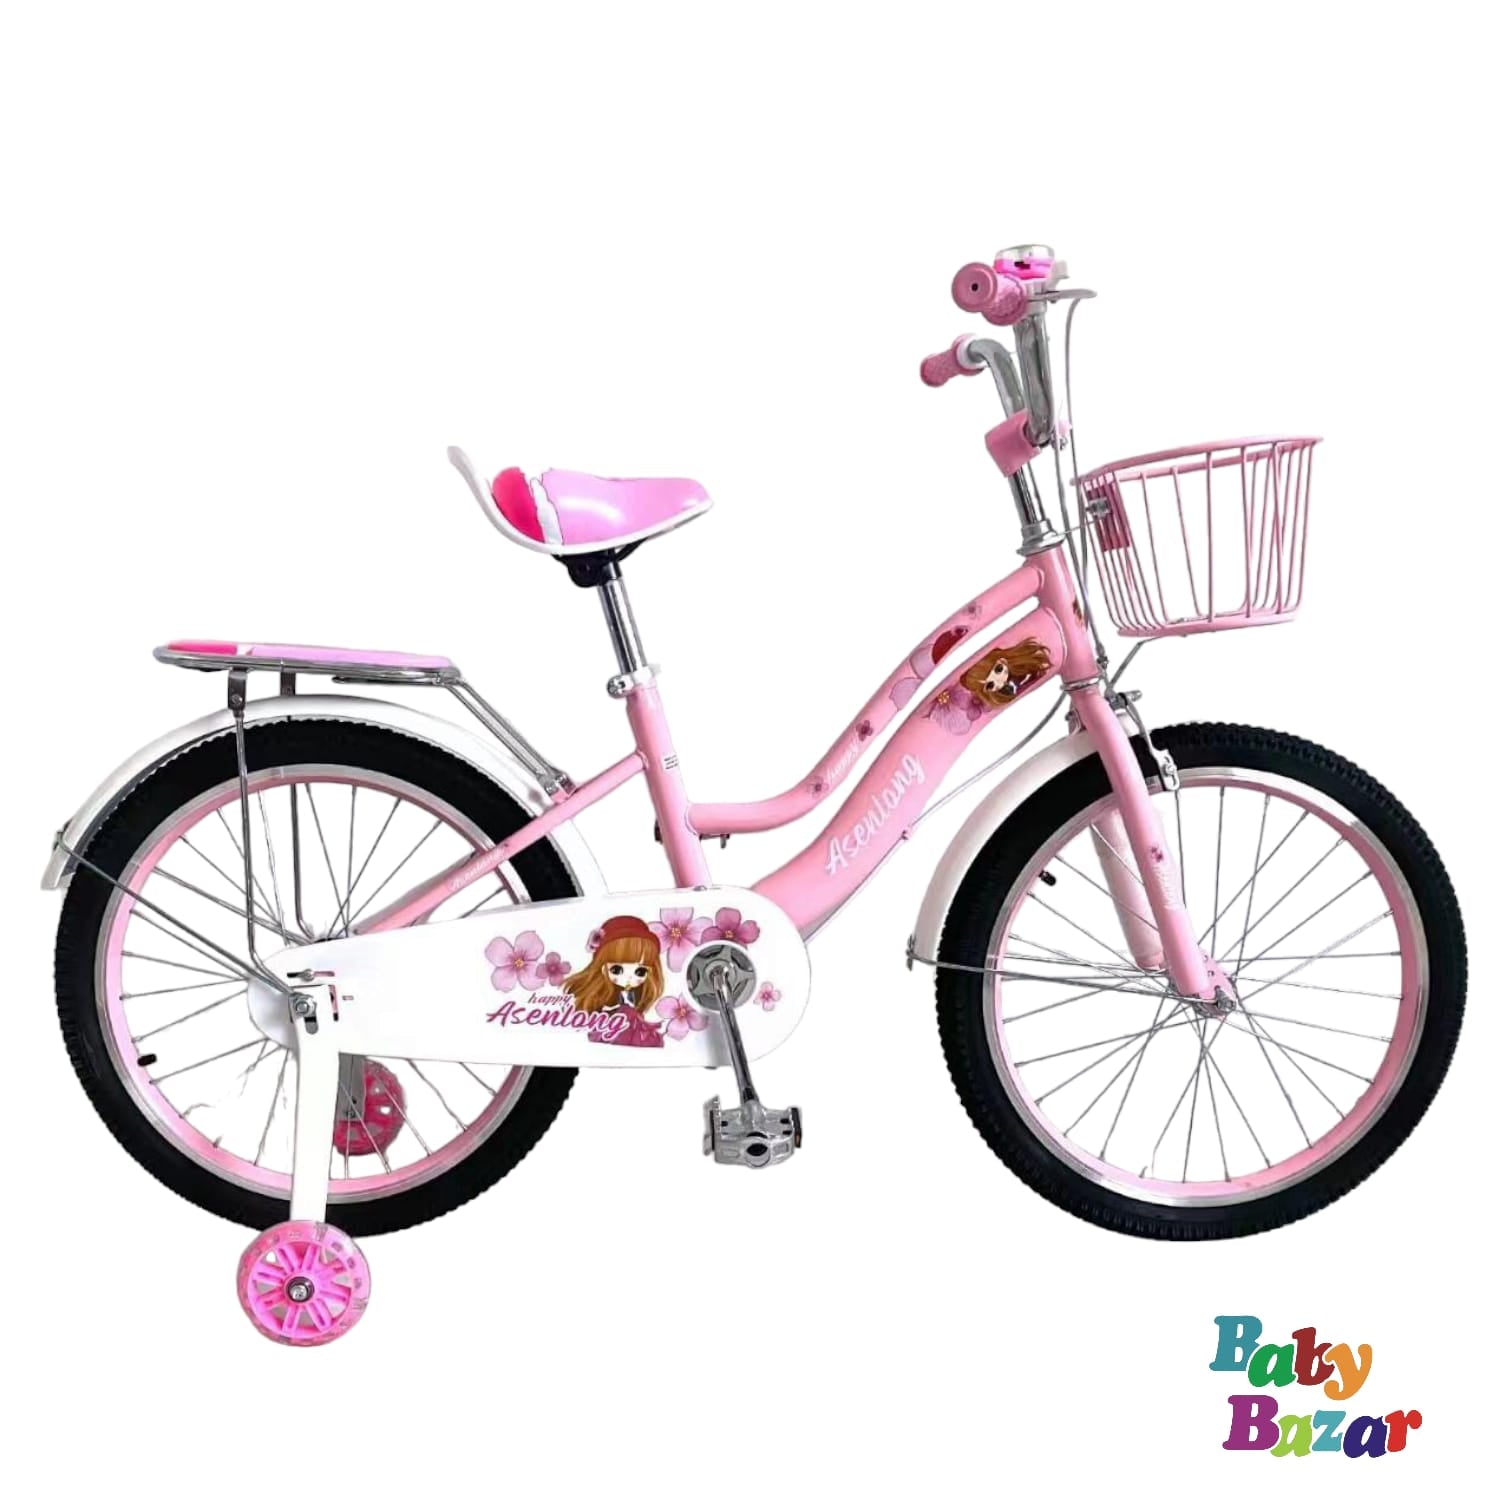 <p class="detail-desc-decorate-title" style="text-align: center;"><strong>Kids Bicycle Mountain Bike Magnesium Alloy Integrated Wheel Pupils Boys And Girls Softail Frame Double V Brake</strong></p> <p class="detail-desc-decorate-content">&nbsp;</p>